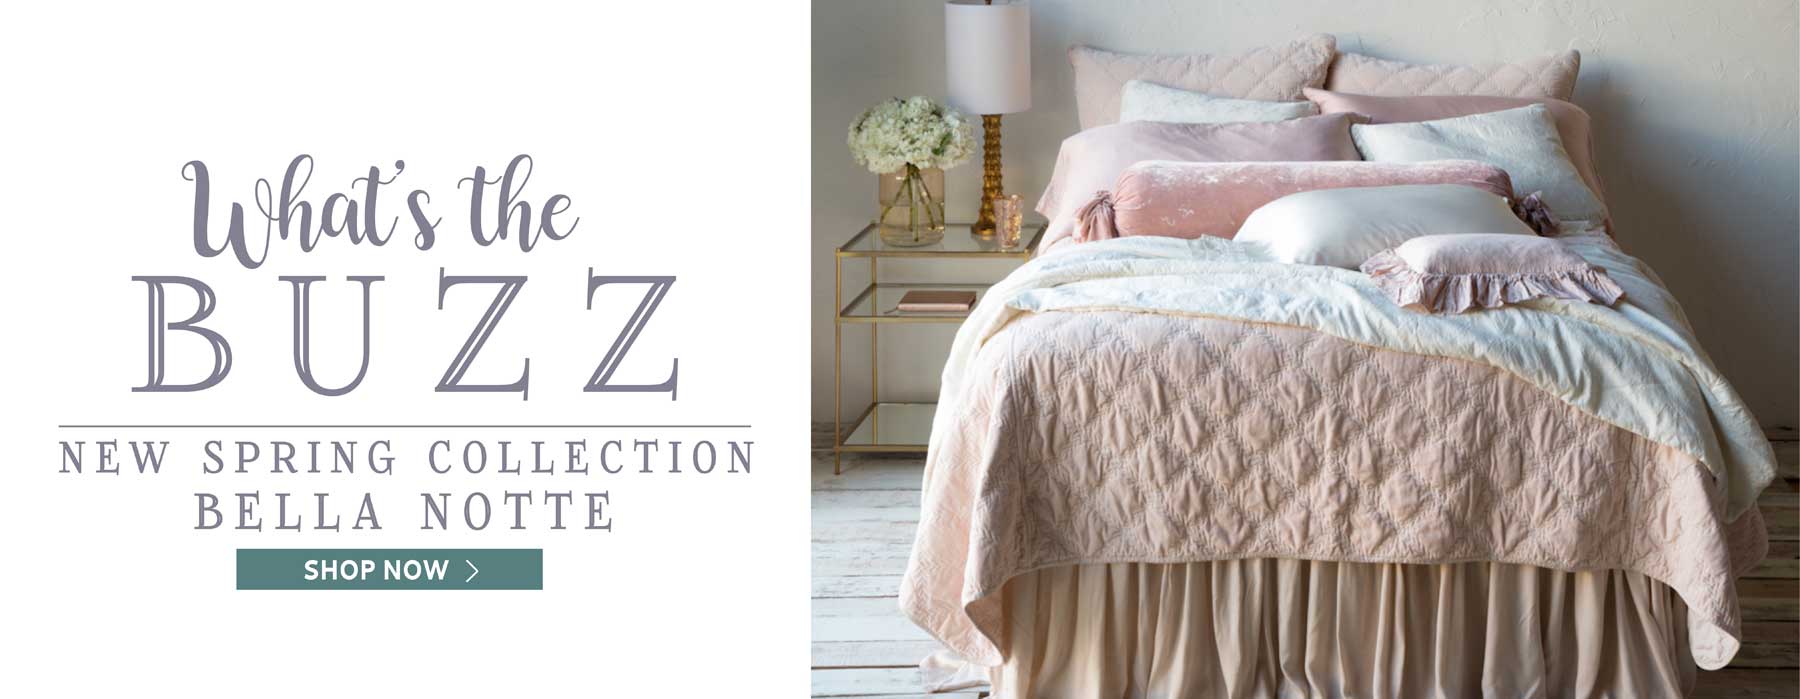 What’s the Buzz - New Spring Collection Bella Notte